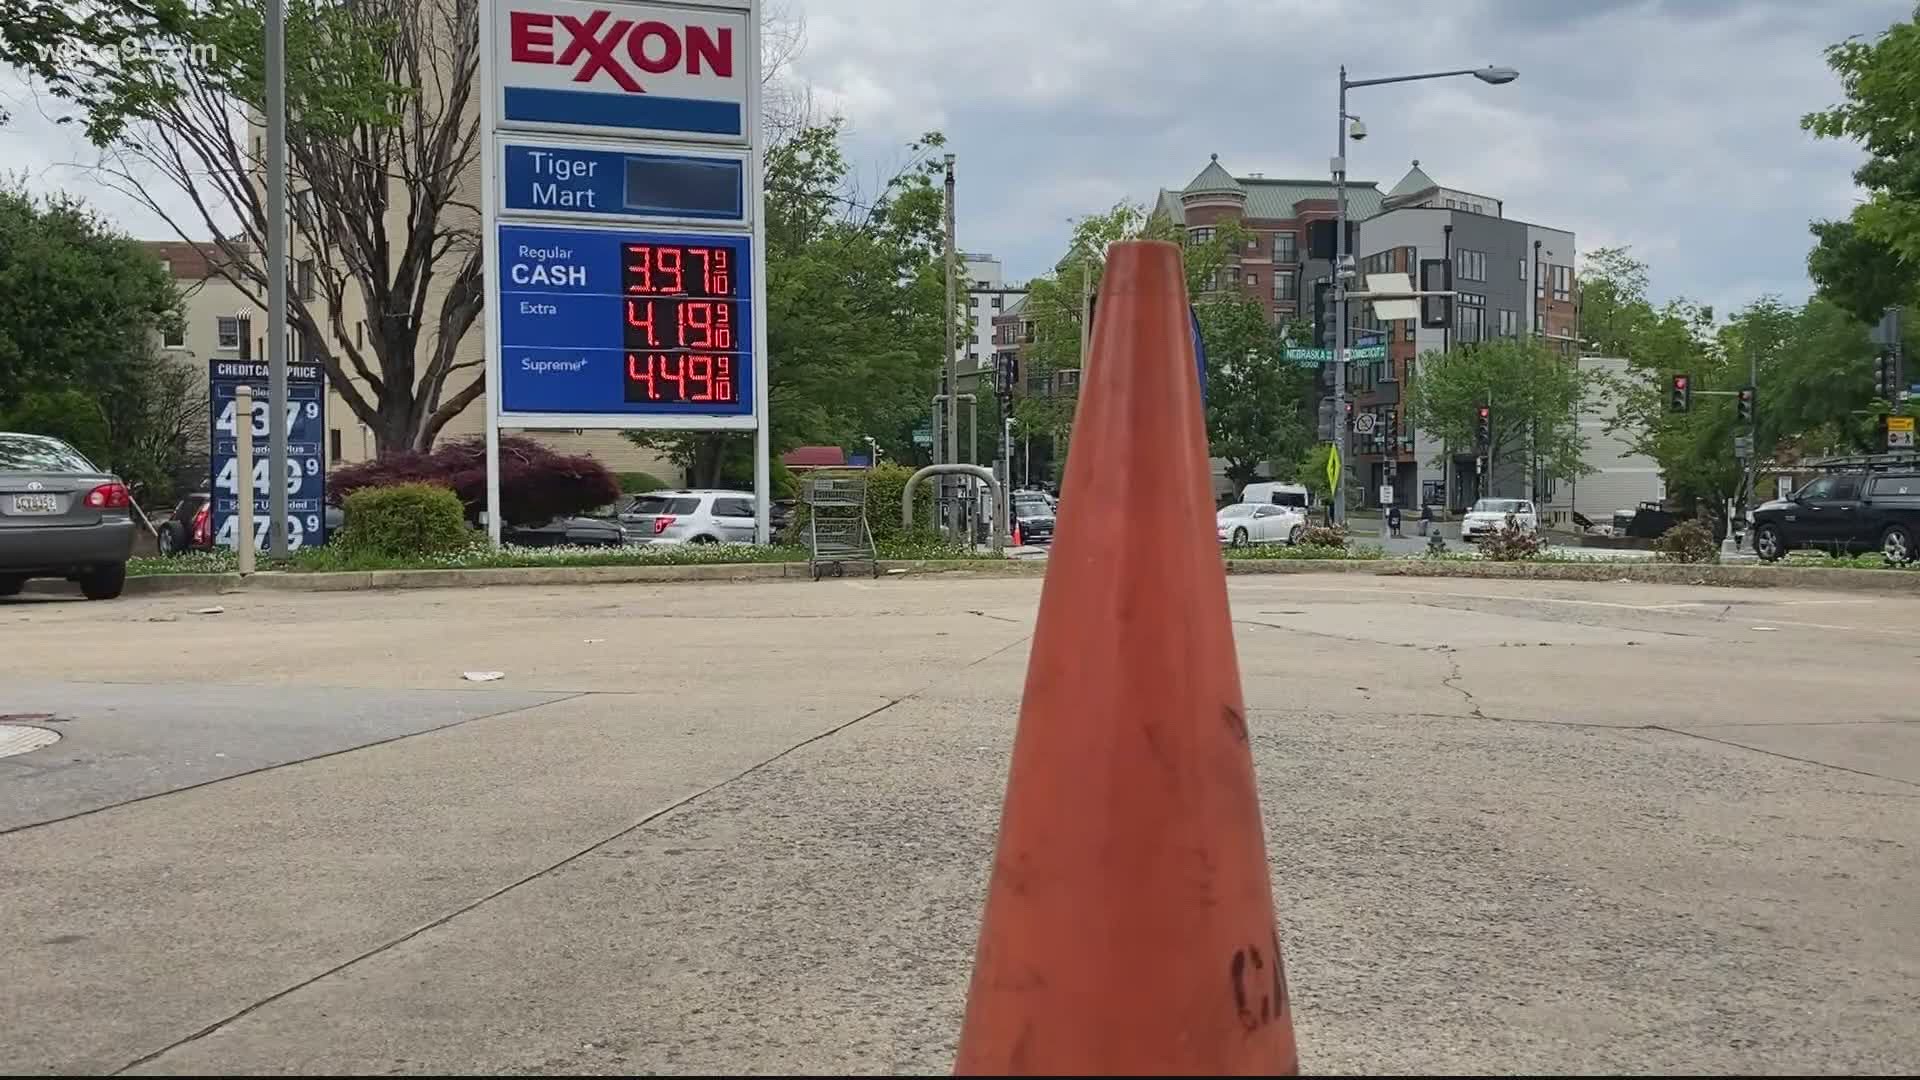 Where can I find gas in DC and why are so many stations out?